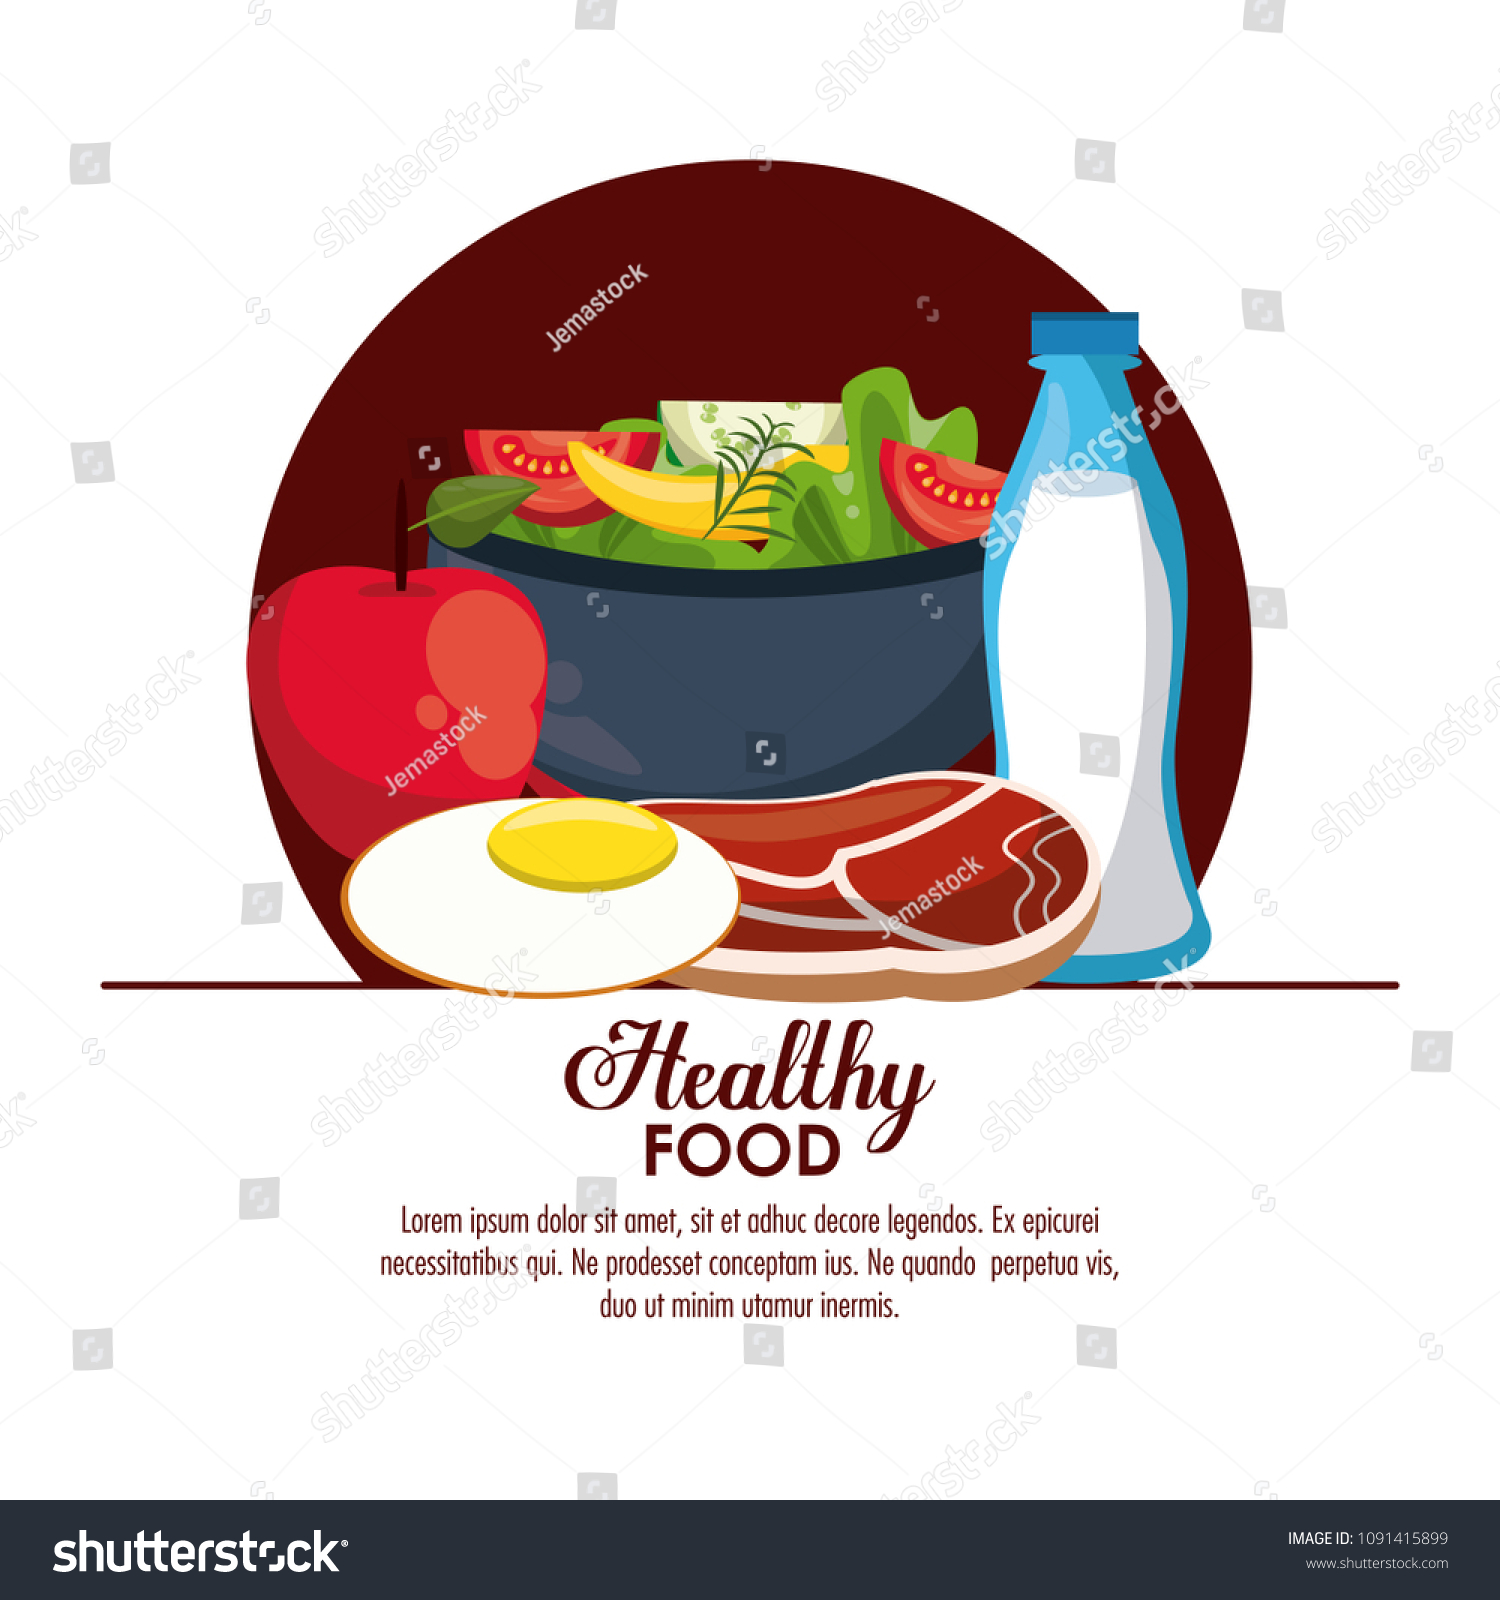 Healthy Food Infographic Stock Vector Royalty Free 1091415899 9651